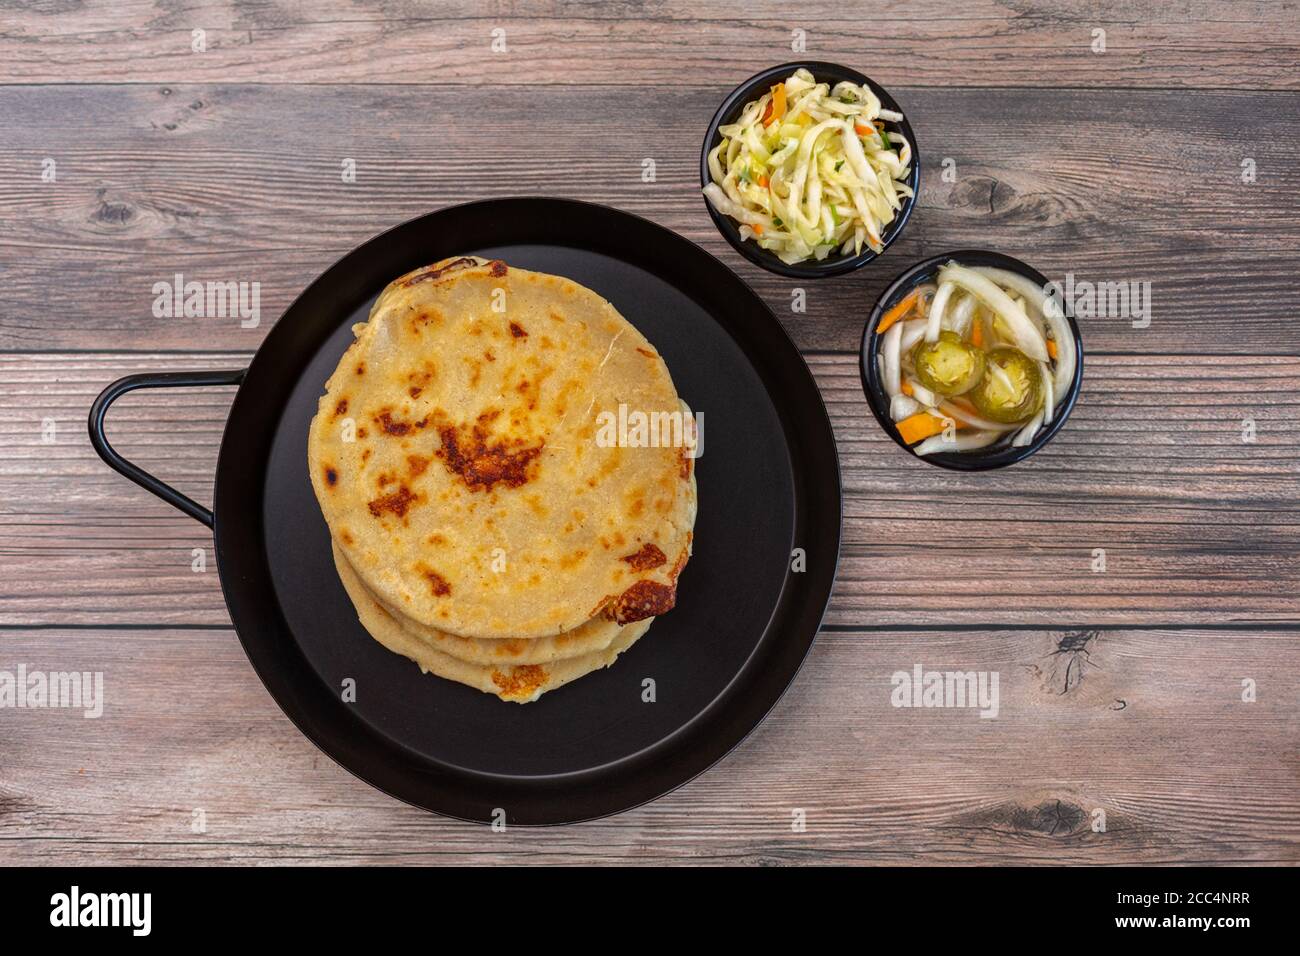 Top  view  of the delicious pupusas  on the pan next to salads in bowls Stock Photo